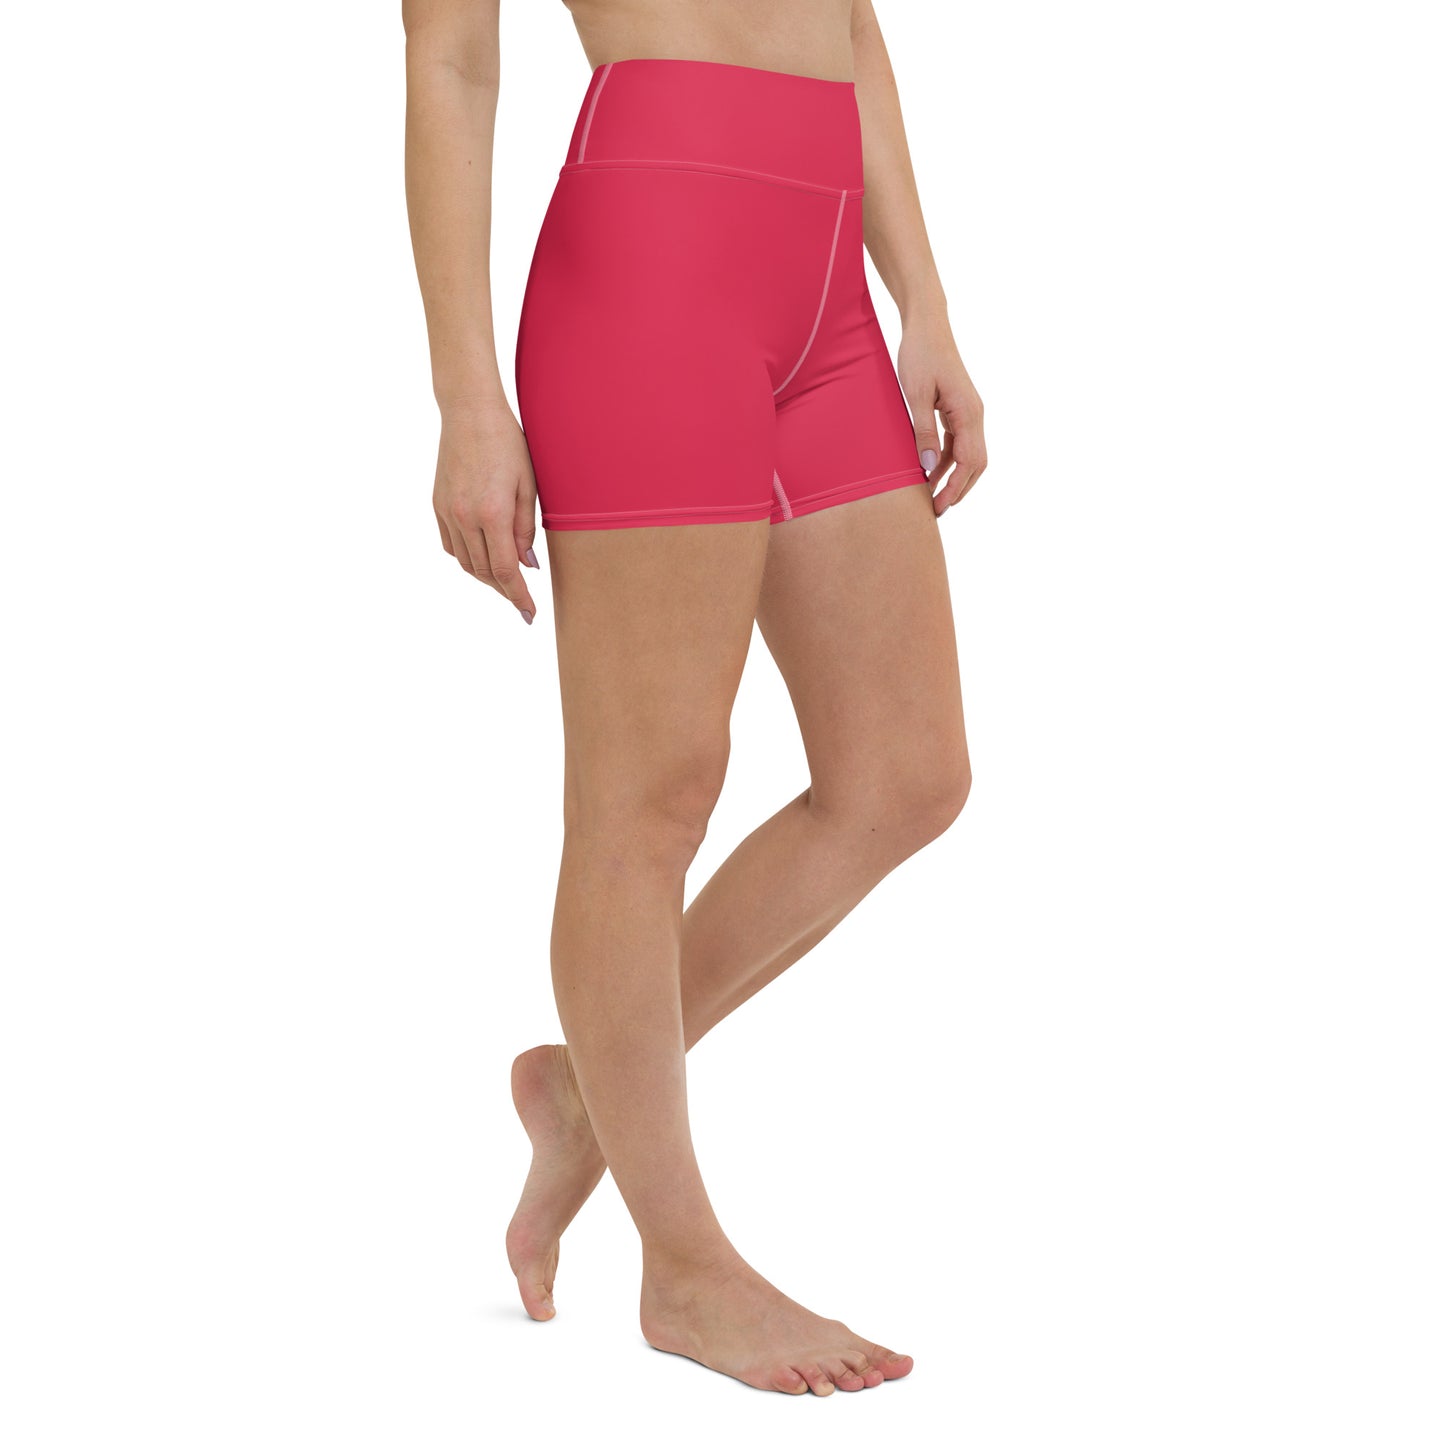 Milano Solid Red High Waist Yoga Shorts / Bike Shorts with Inside Pocket